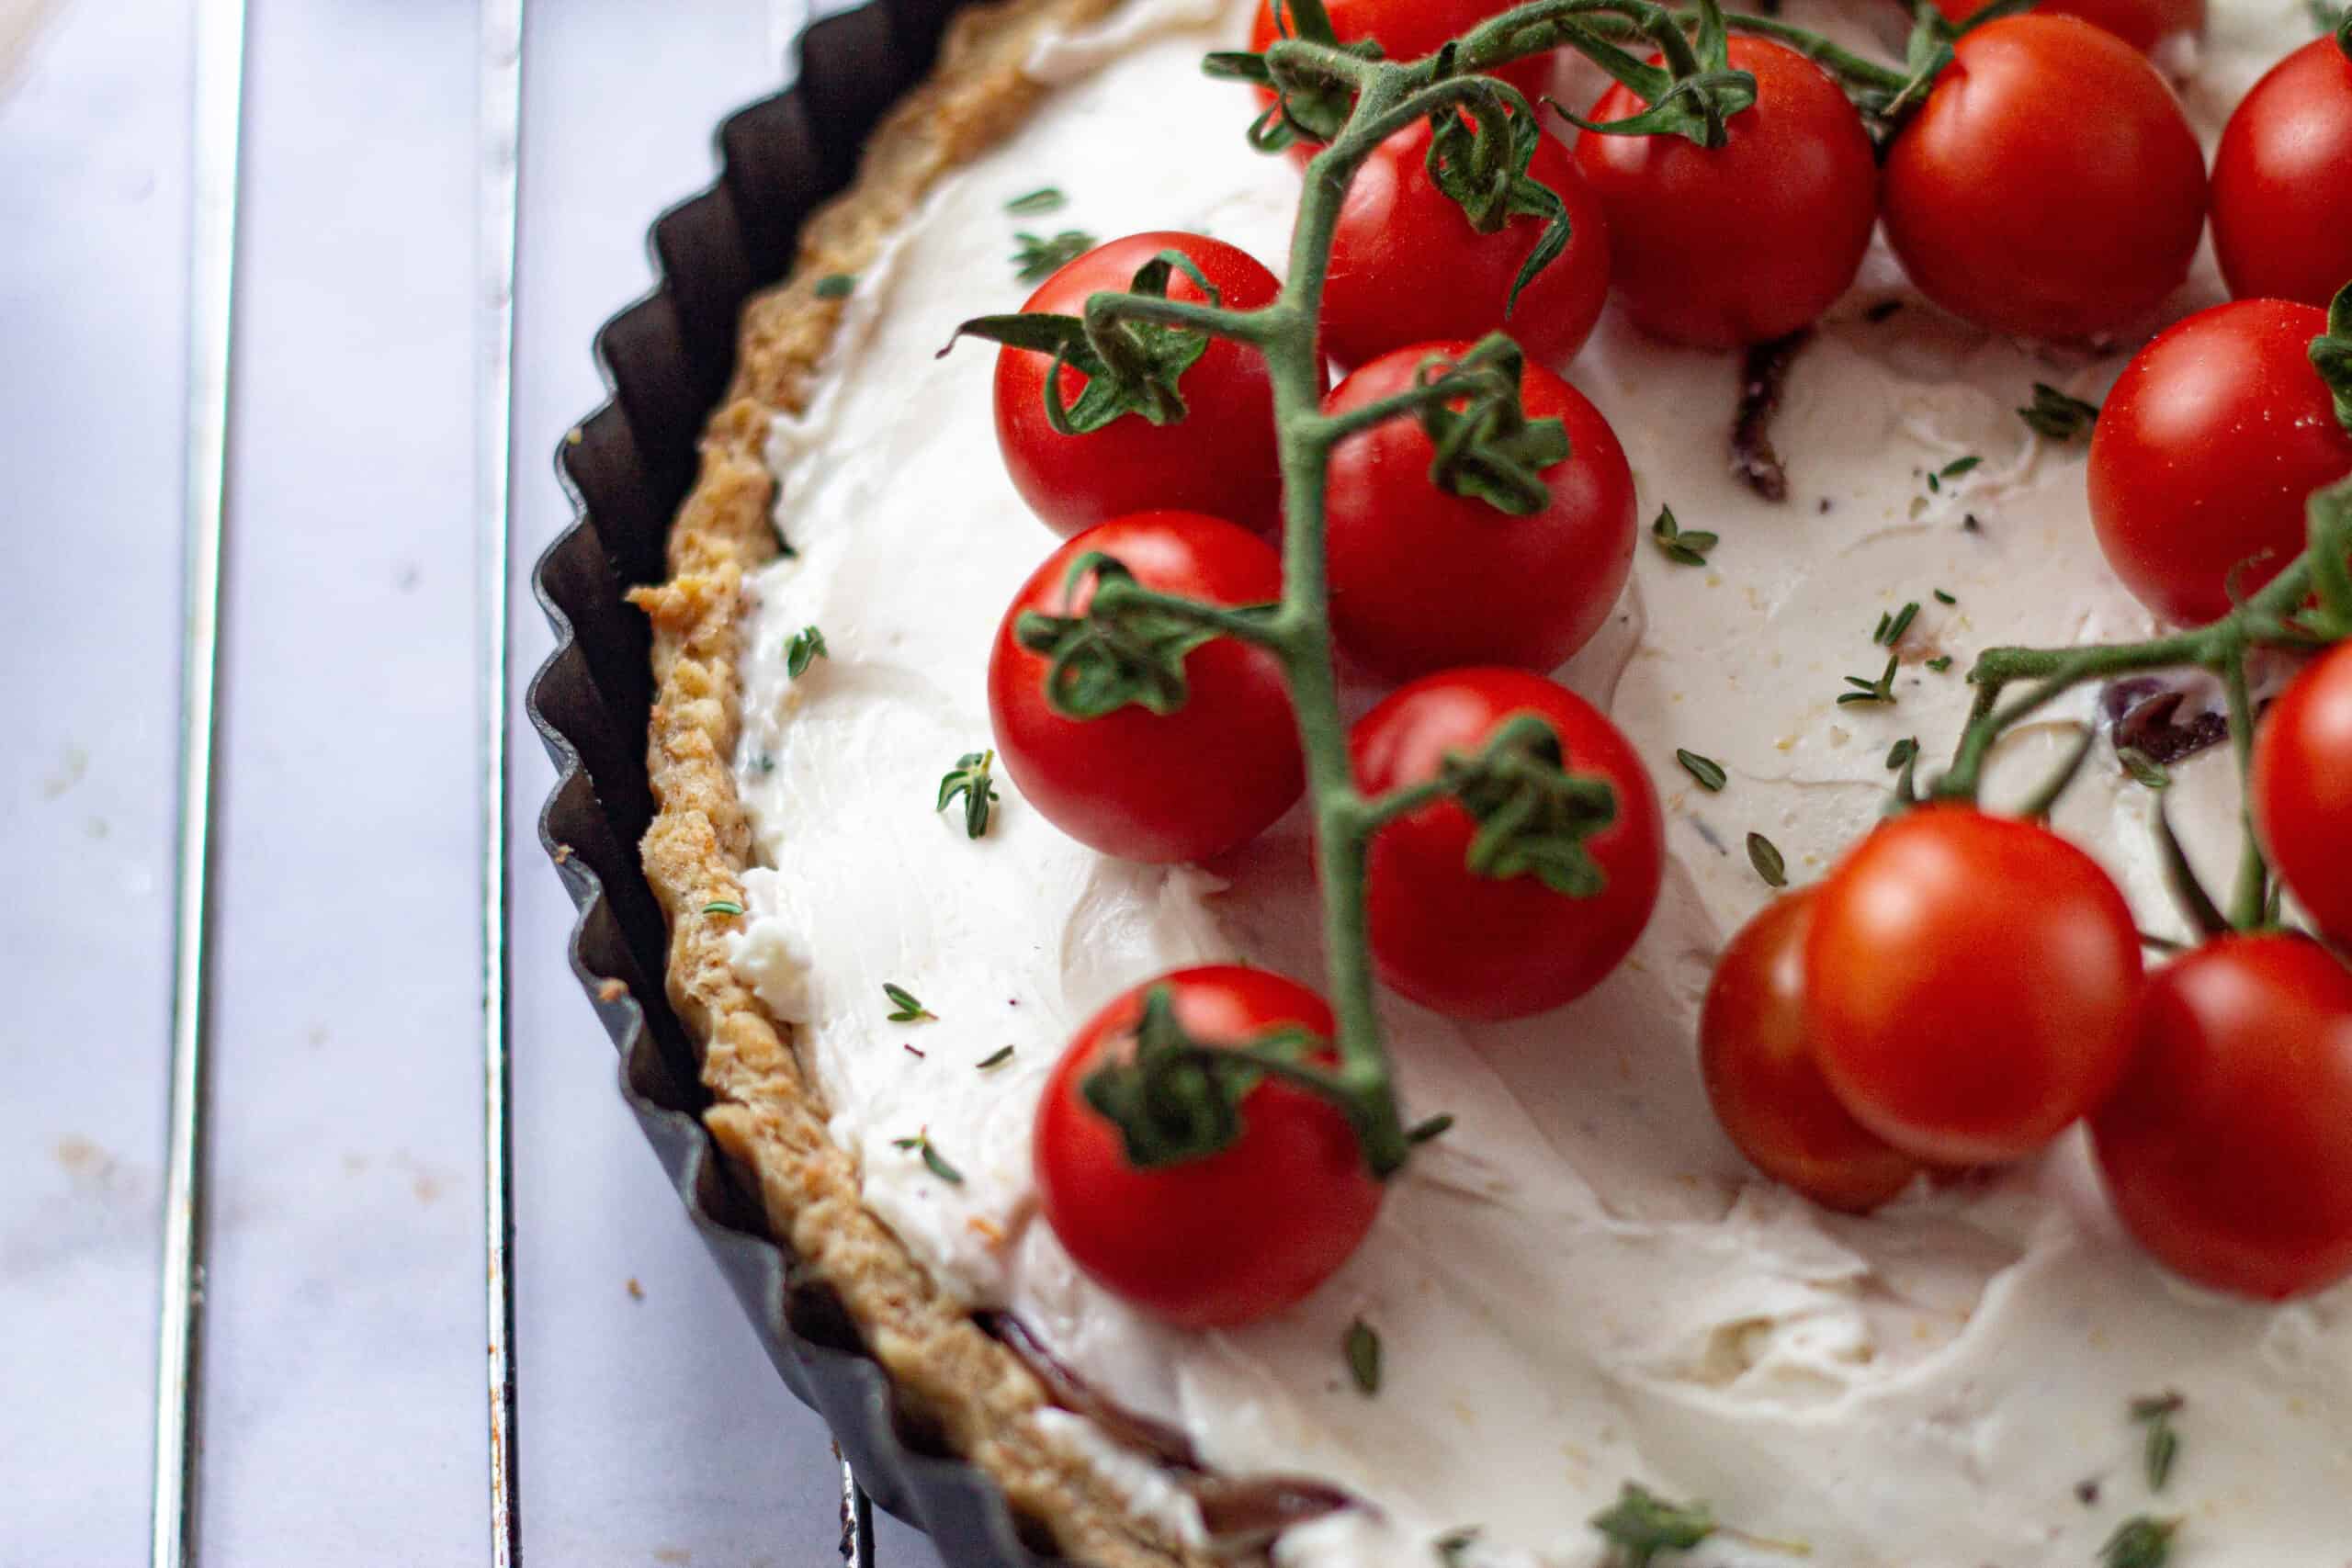 Placing tomatoes on the tomato tart